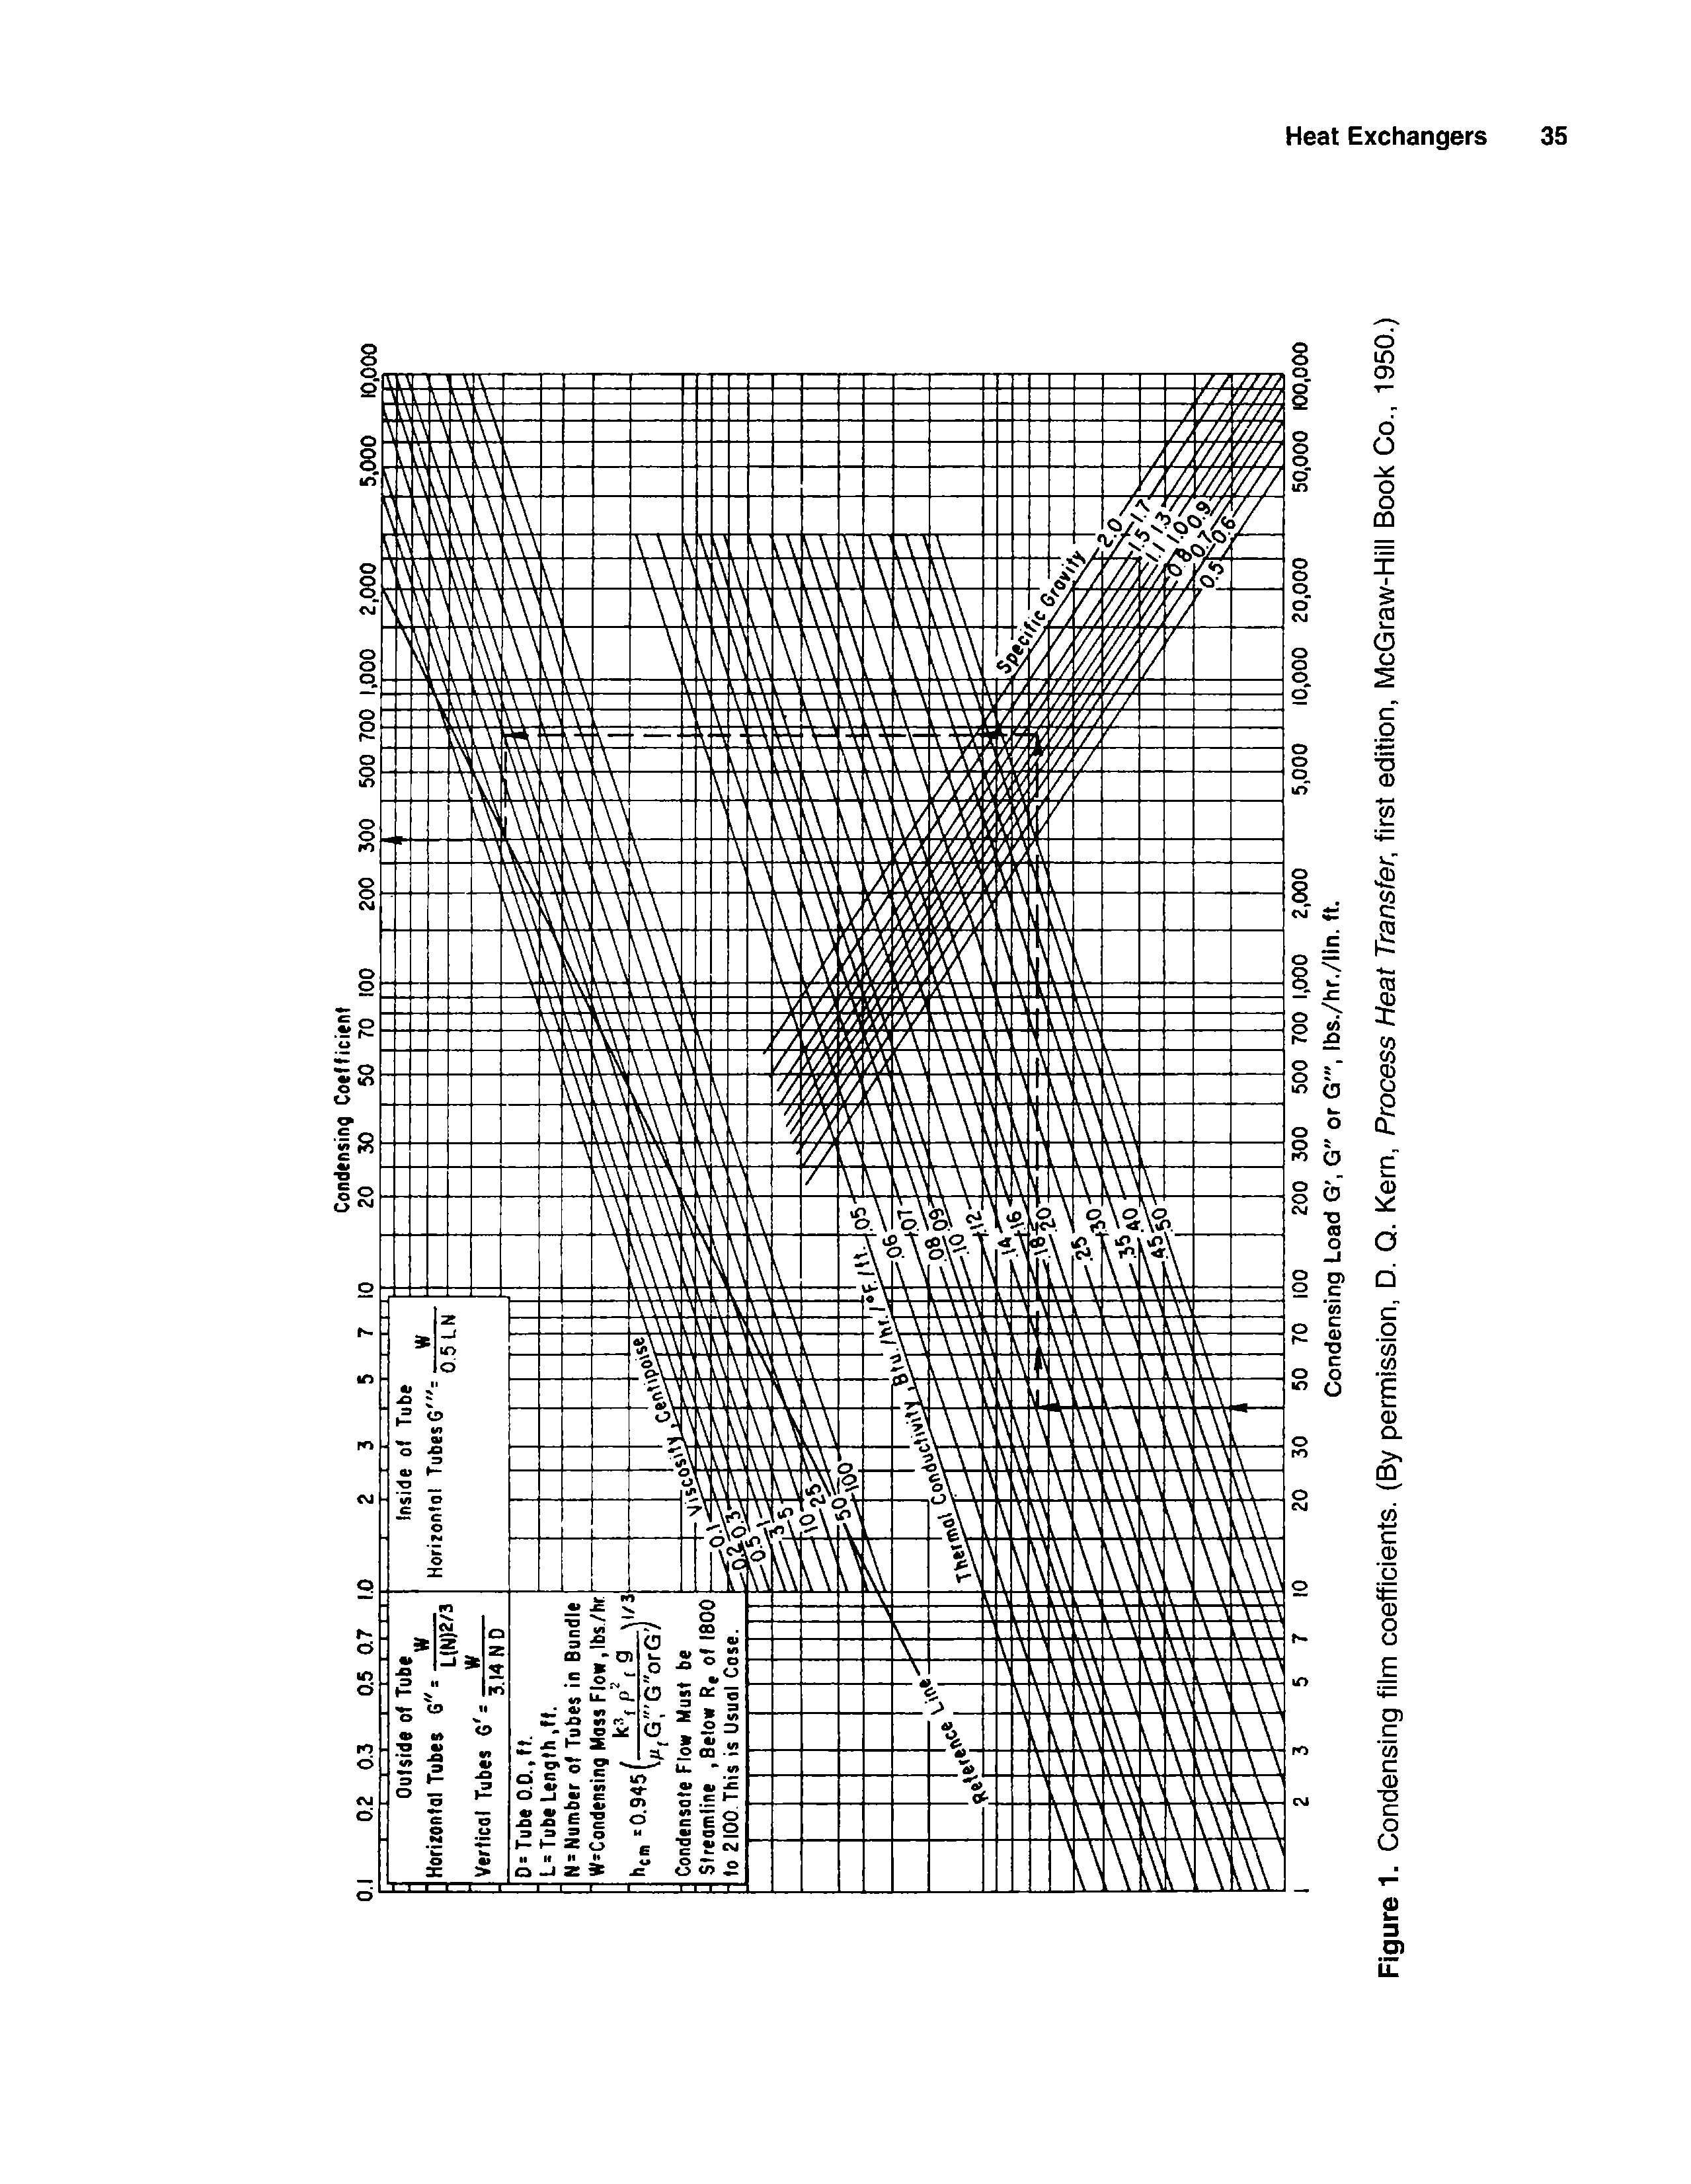 Figure 1 Condensing film coefficients. (By permission, D. Q. Kern, Process Heat Transfer, first edition, McGraw-Hill Book Co., 1950.)...